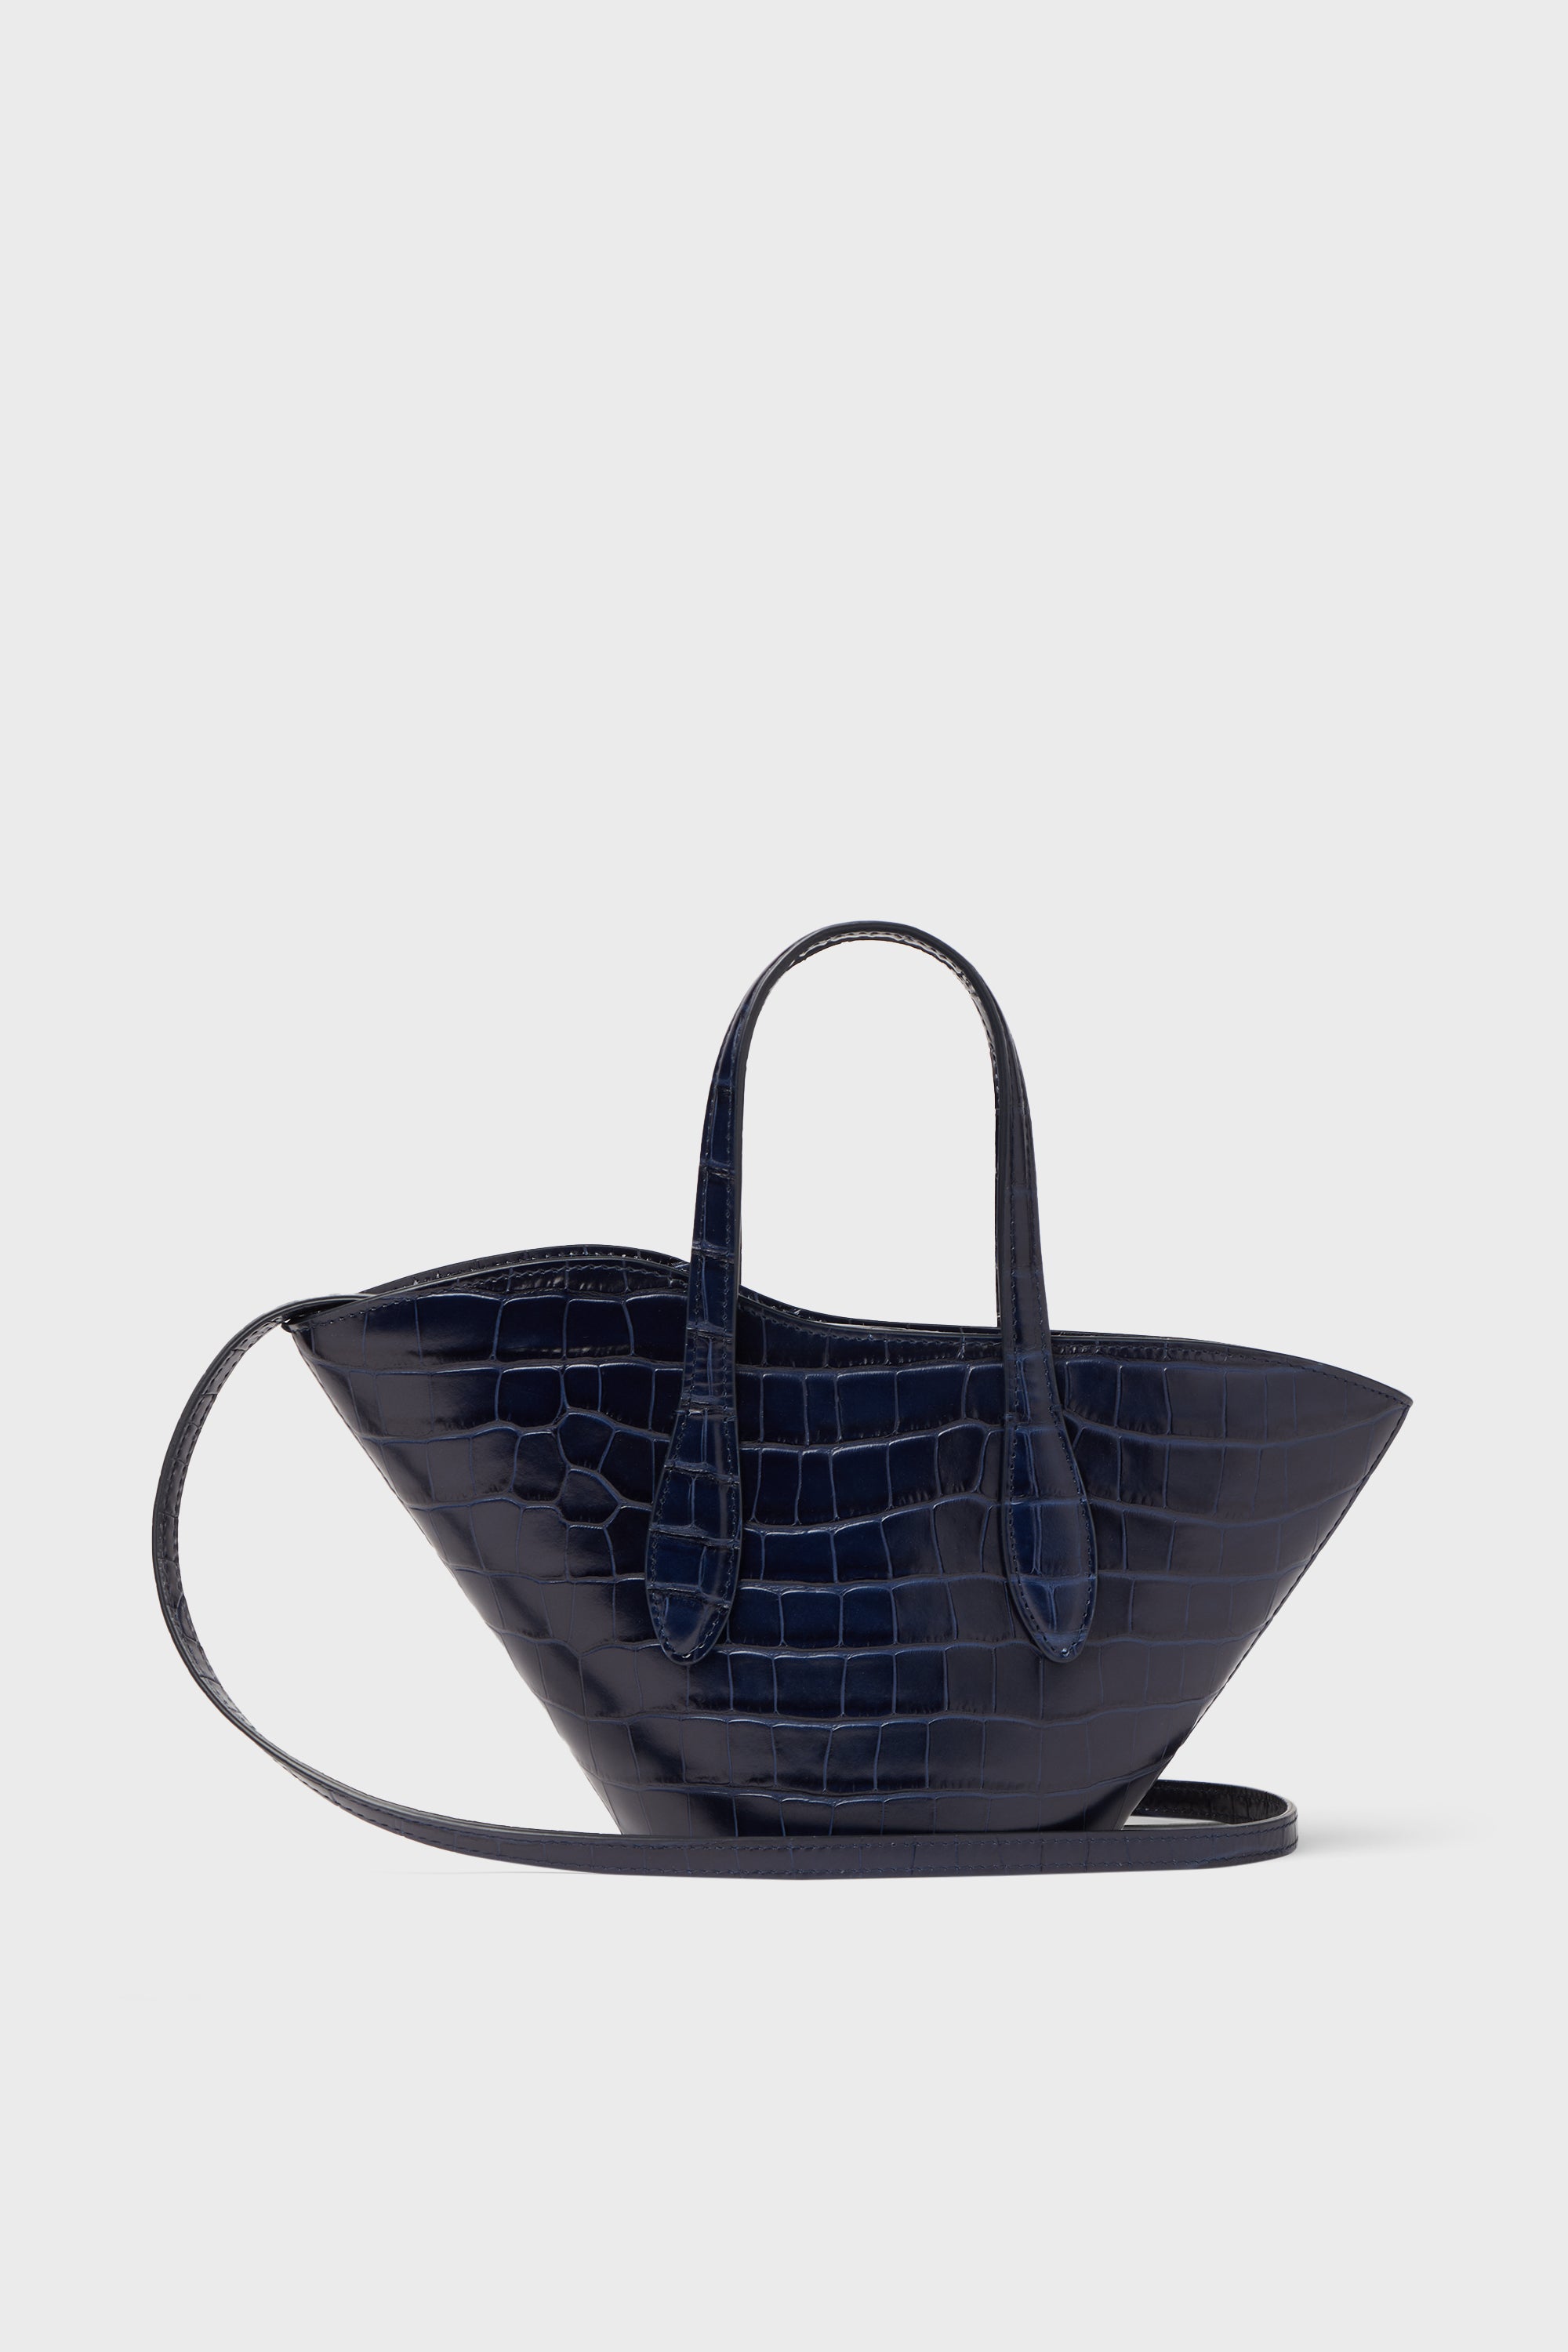 Little Liffner's Minimalist Bags Are Functional And Trendy